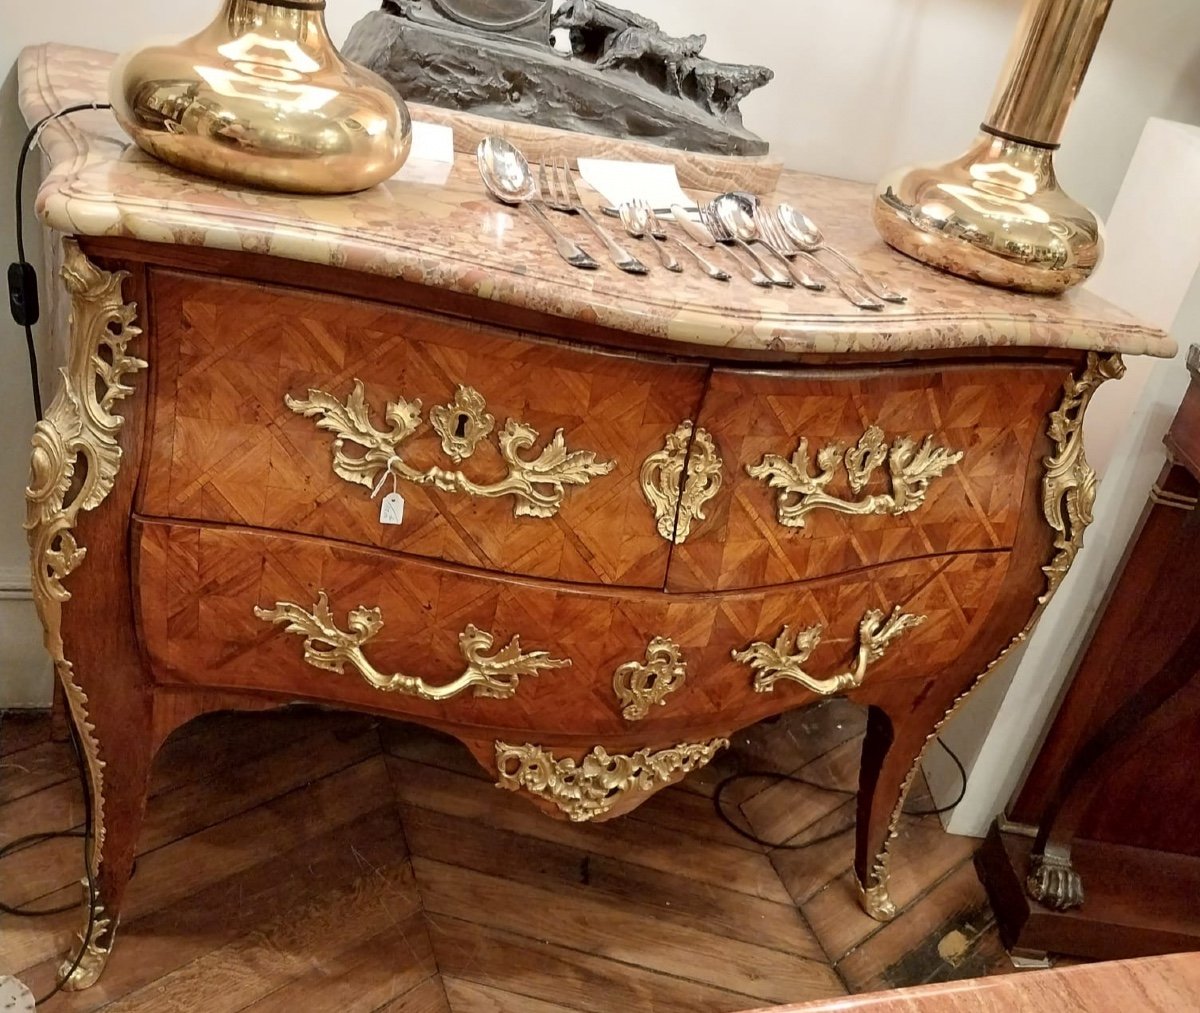 Roussel, Inlaid Commode, 18th Century-photo-2